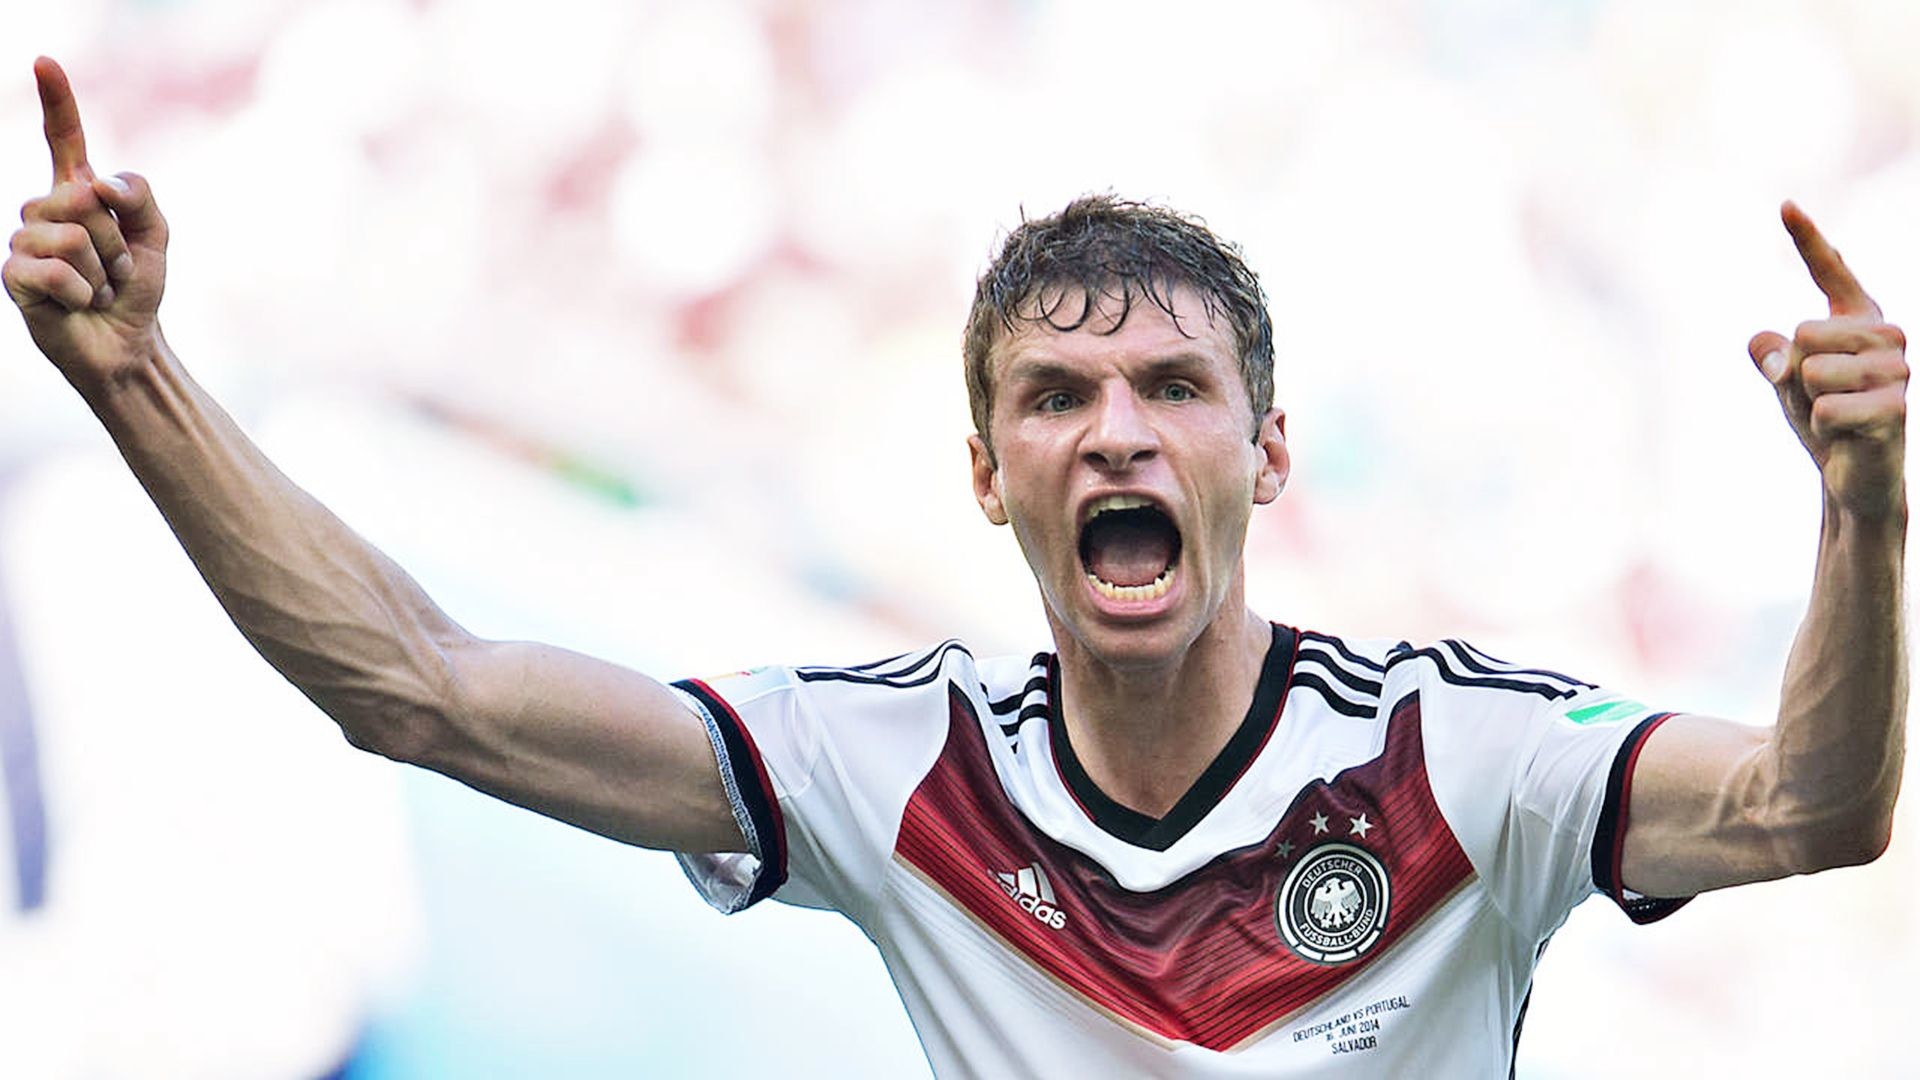 1920x1080 Thomas muller German national football player images....... http: